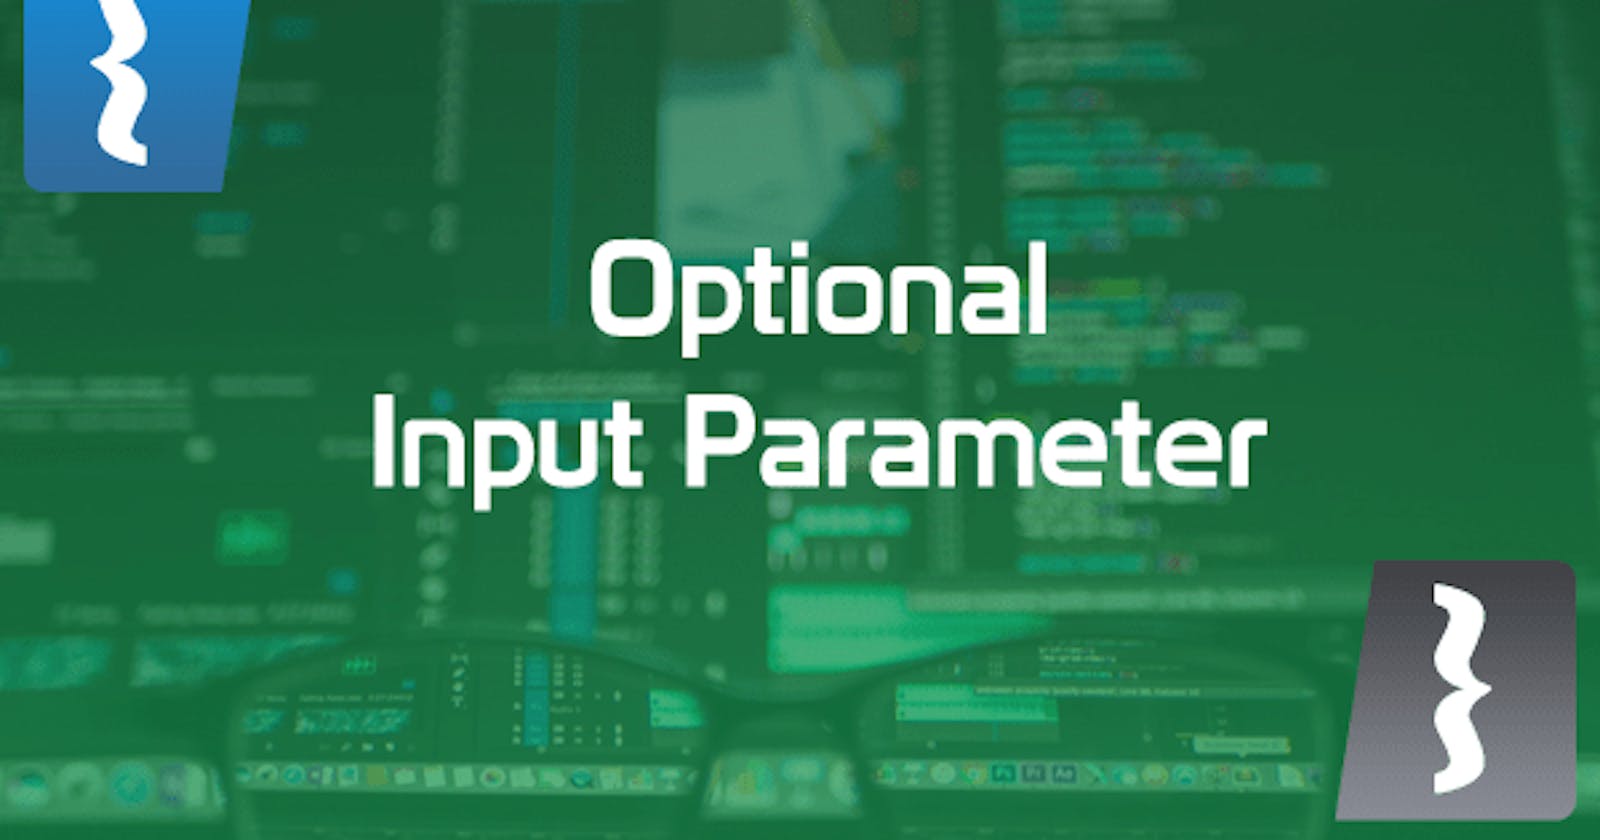 An argument for using Optional as input parameters